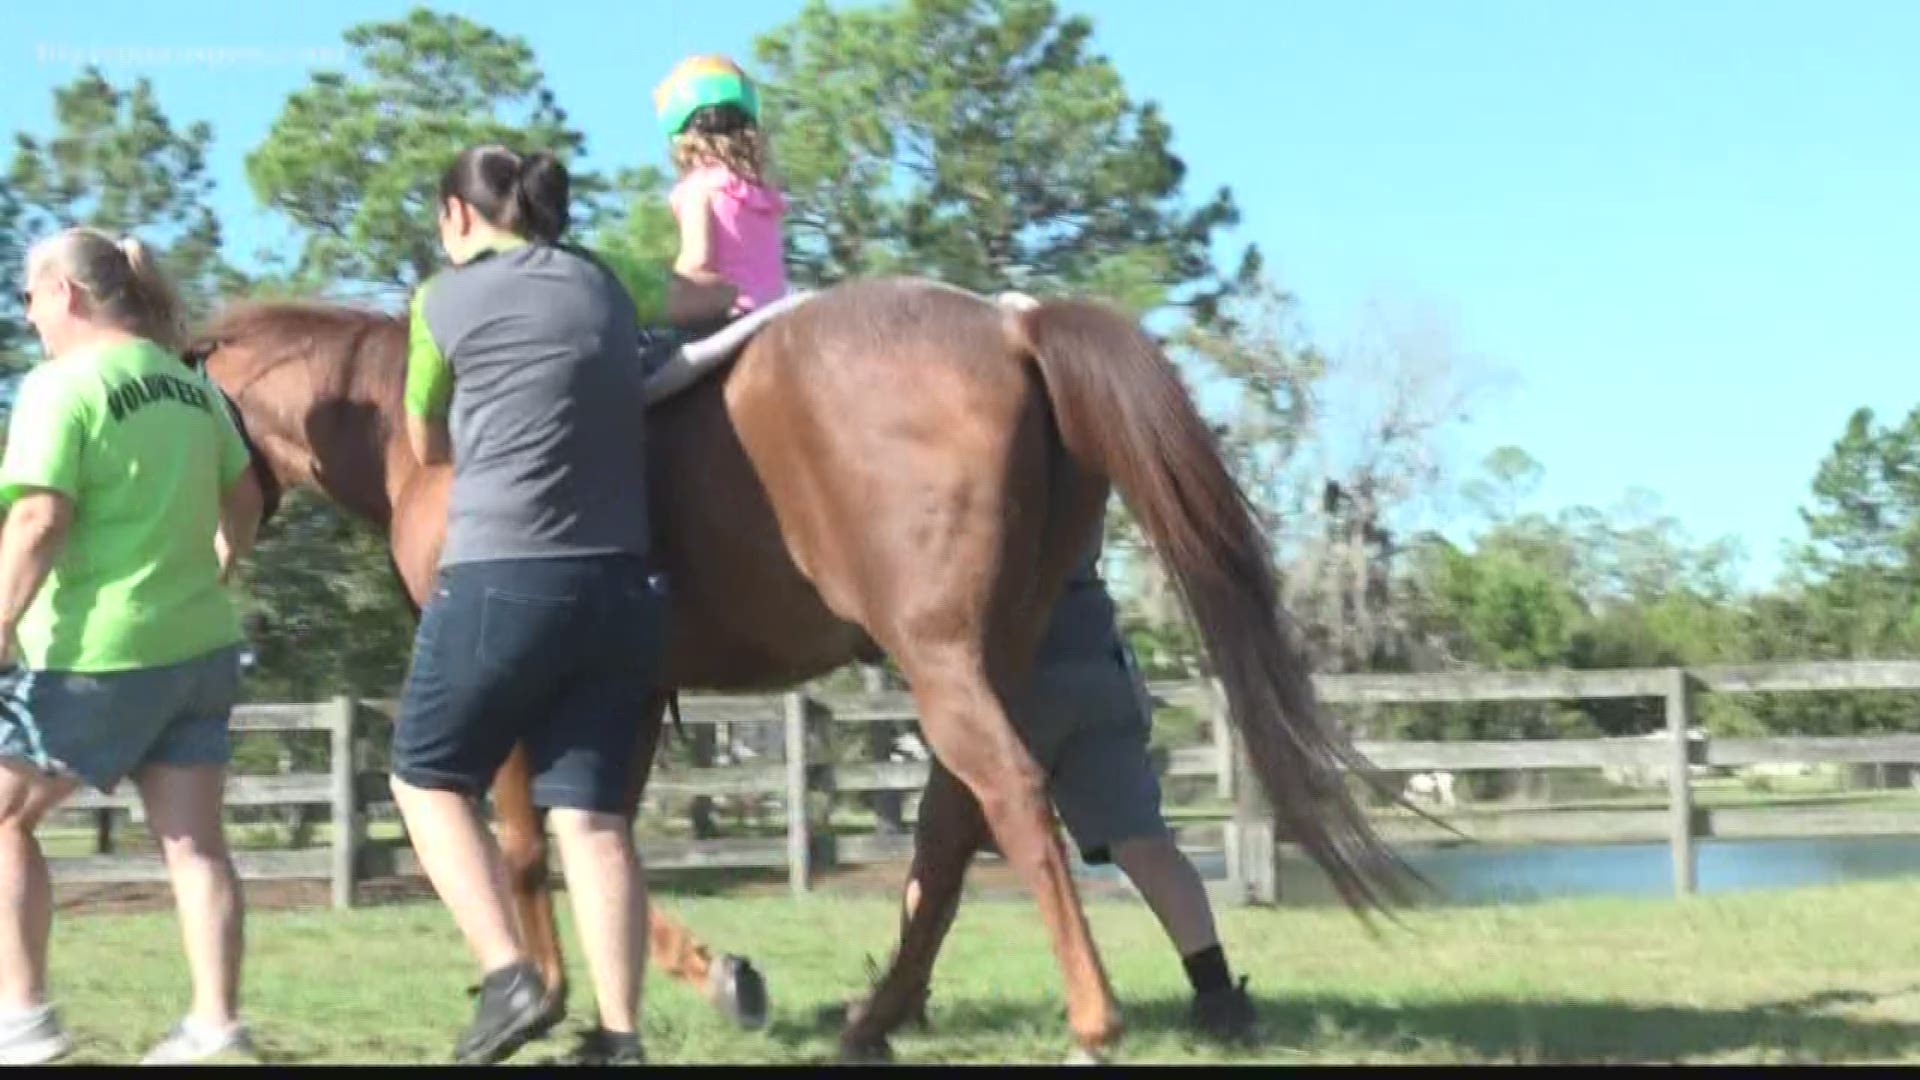 The therapy is called Hippotherapy, some of the therapy techniques include letting kids ride backward, voice commands to the horse and playing catch.